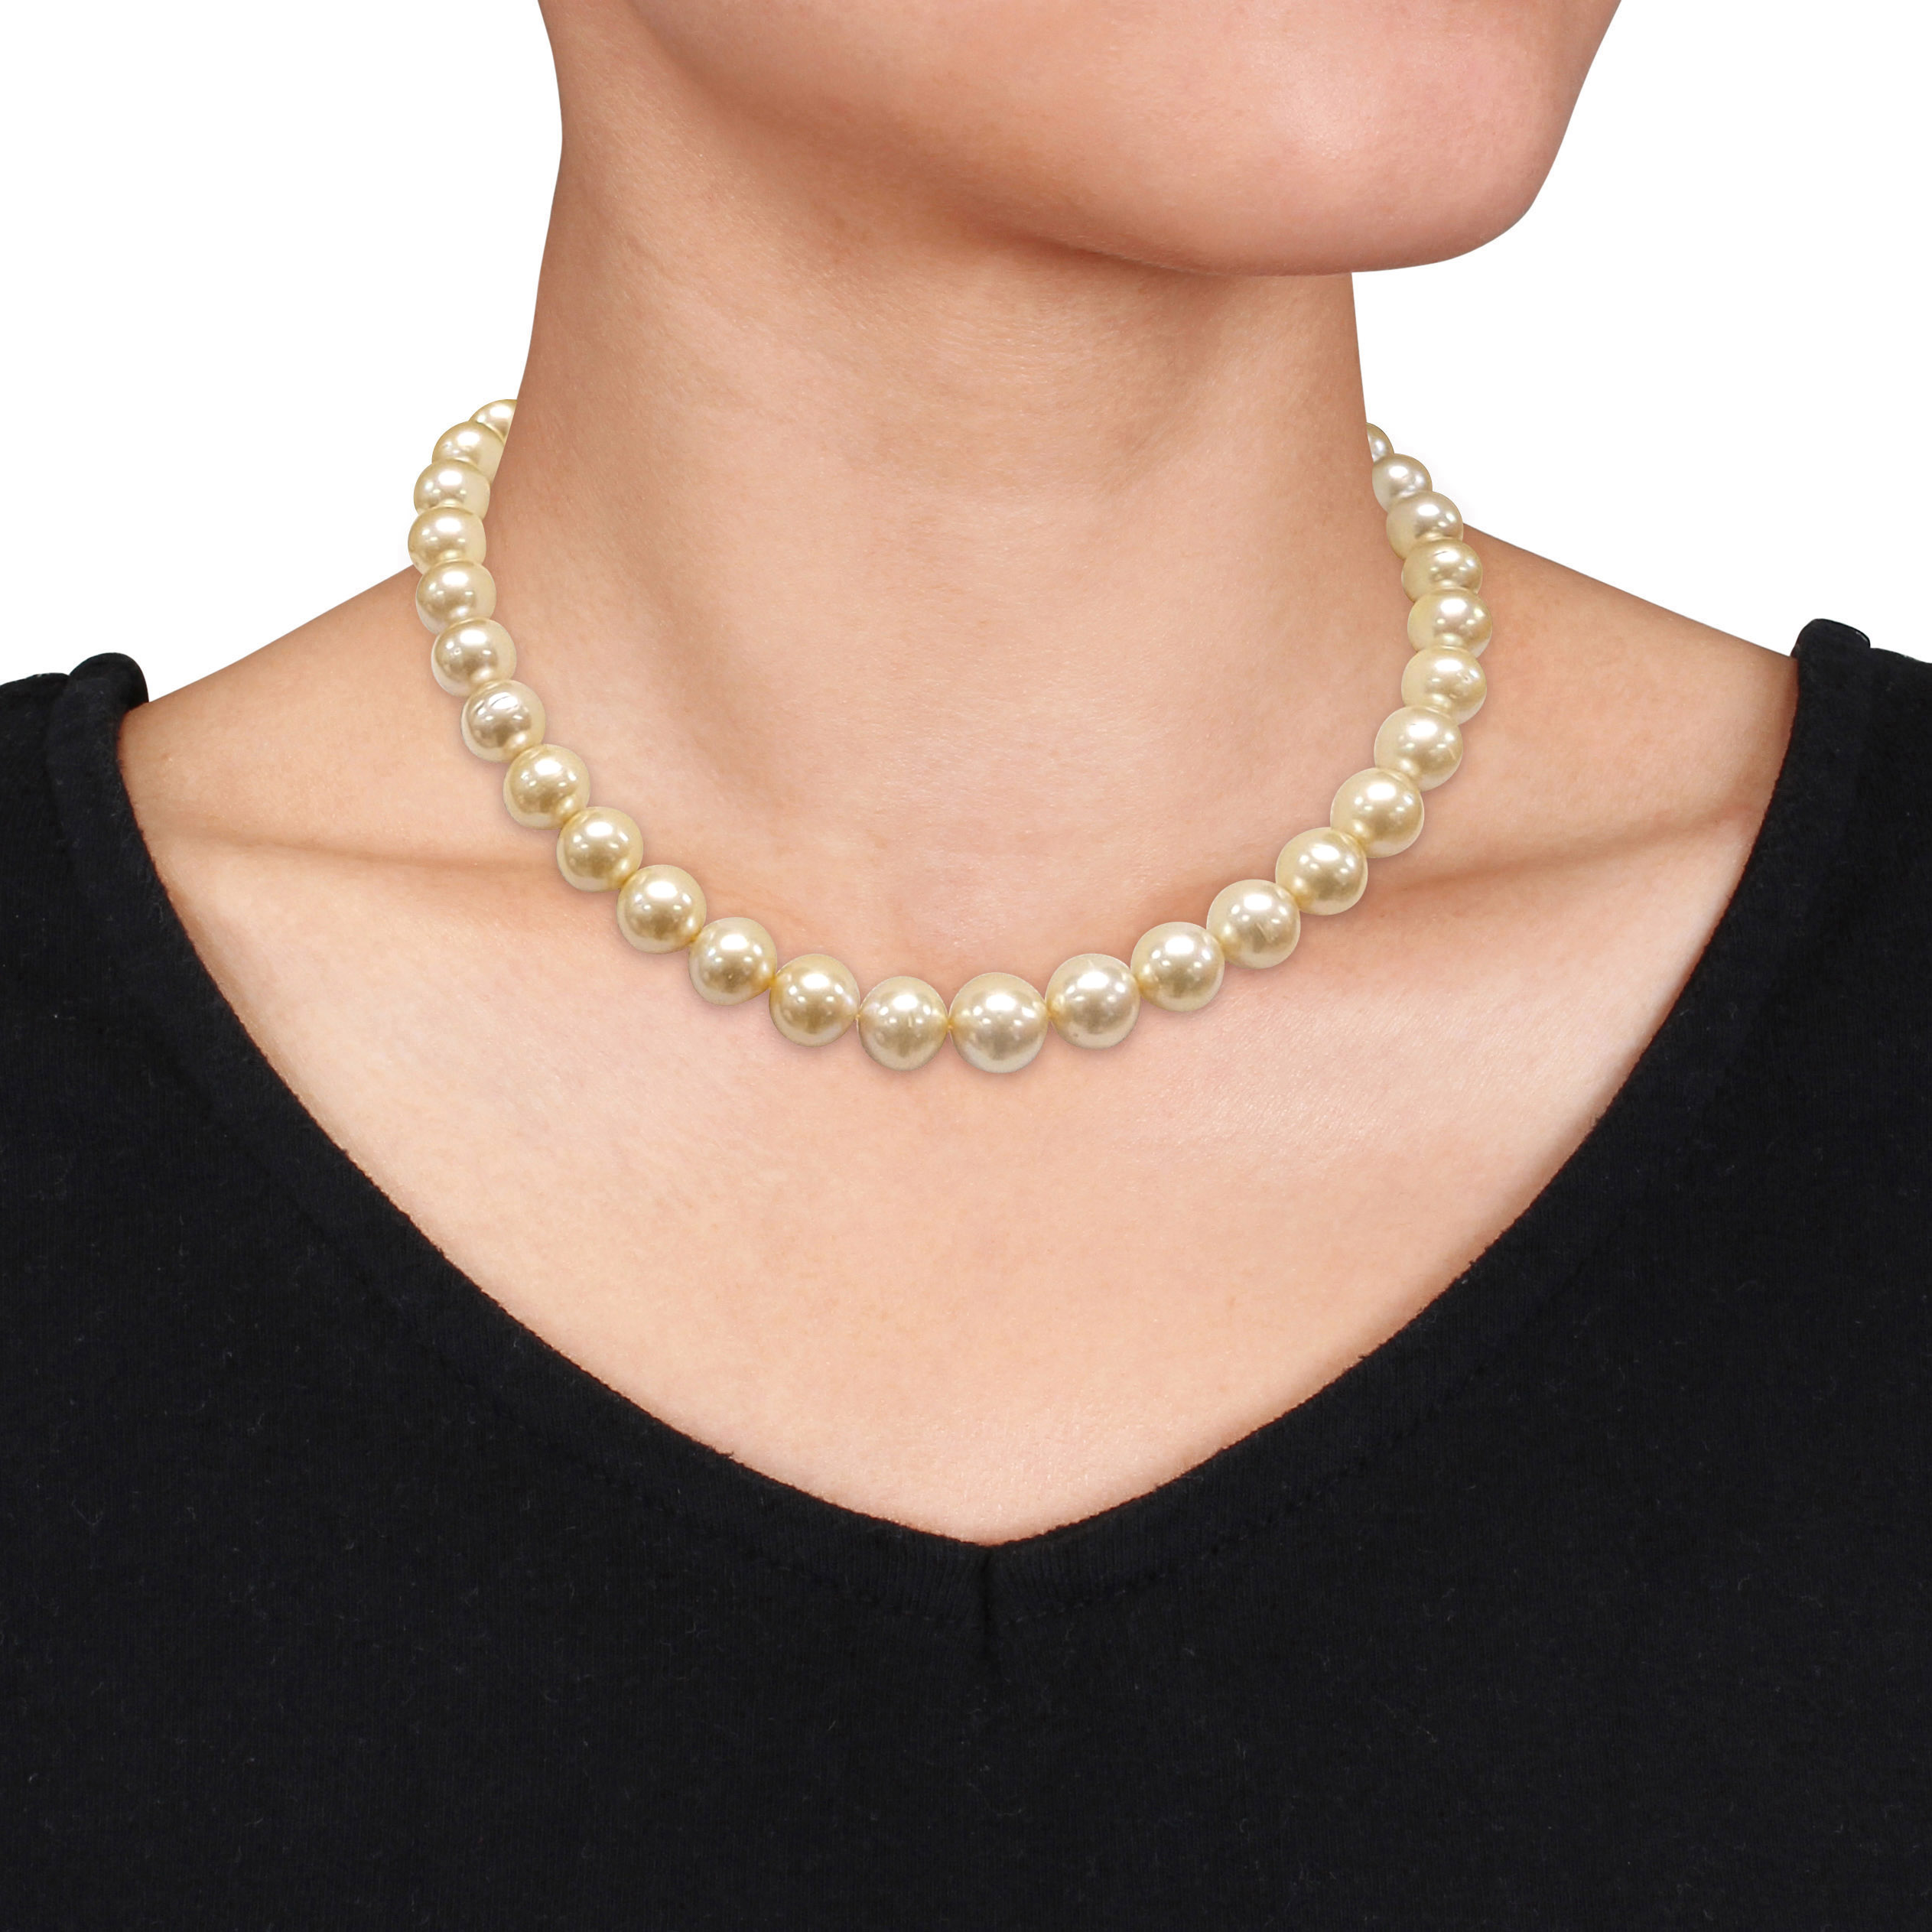 10-12.5 MM South Sea Cultured Graduated Pearl Necklace with 14k Yellow Gold Corrugated Ball Clasp - 18 in